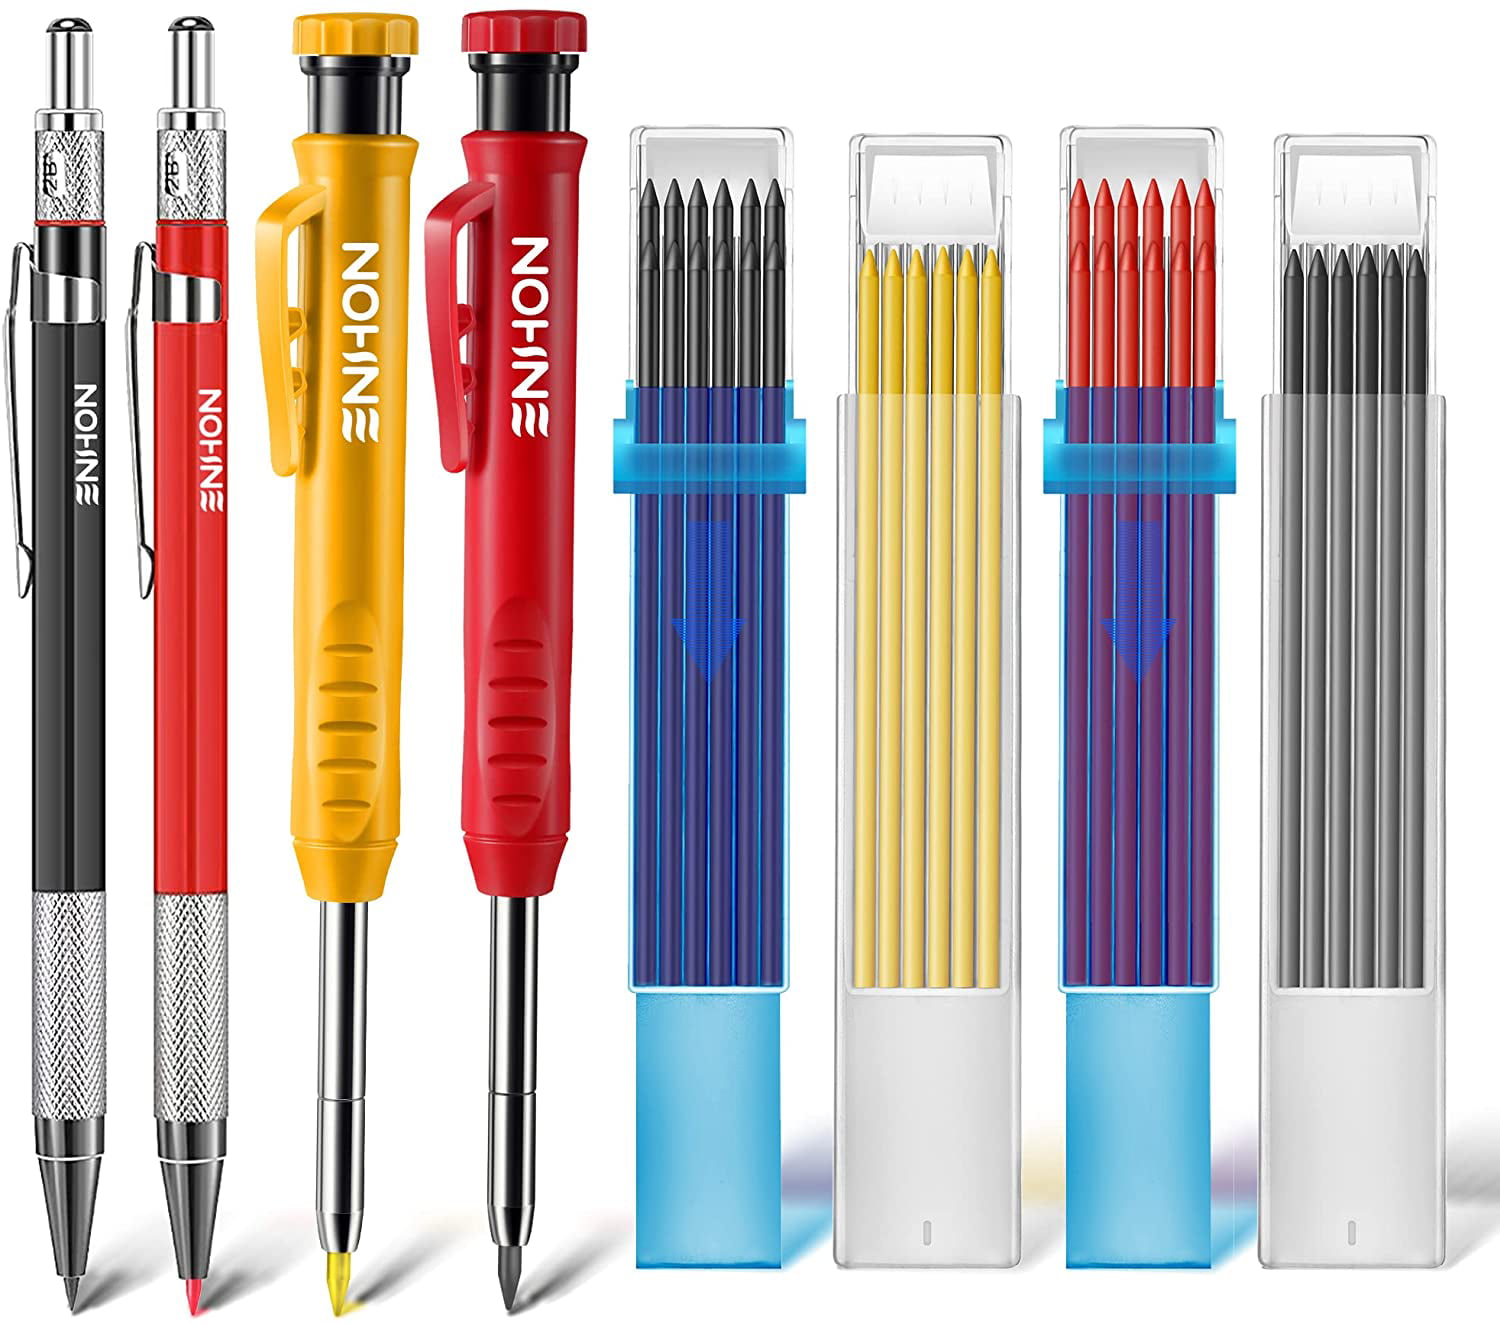 4 Pcs Colorful Deep Hole Pencils Marker Marking Tool with Built-in Sharpener Mechanical Carpenter Pencils Set with 40 Pcs Refills Great for Construction Drafting Architect Woodworking Scriber Tool 